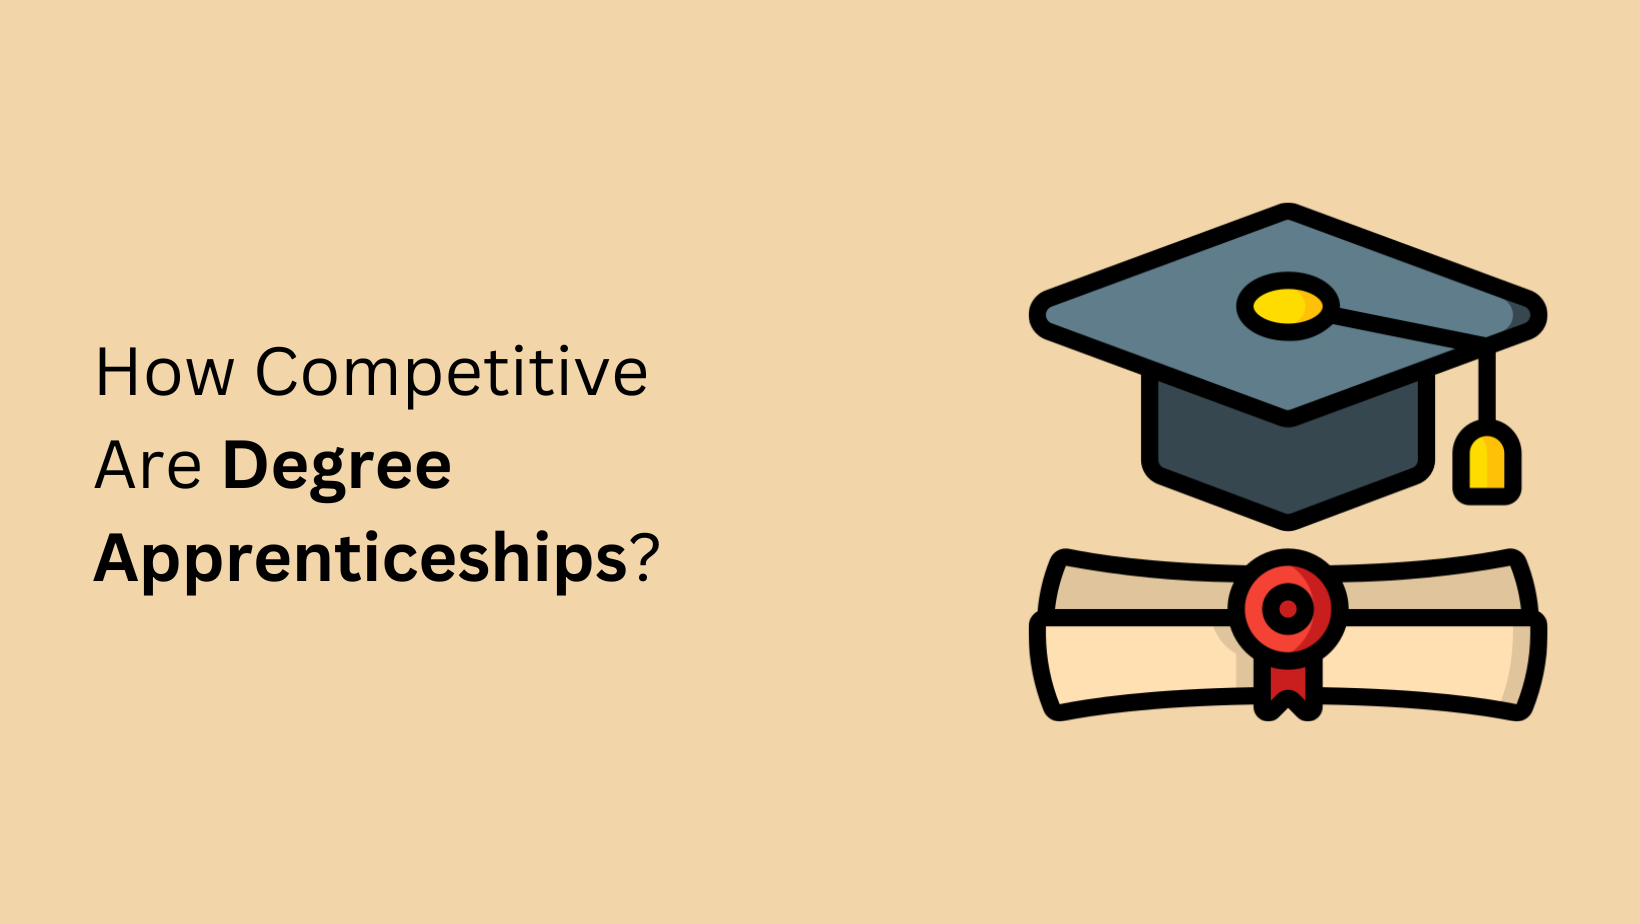 How Competitive Are Degree Apprenticeships